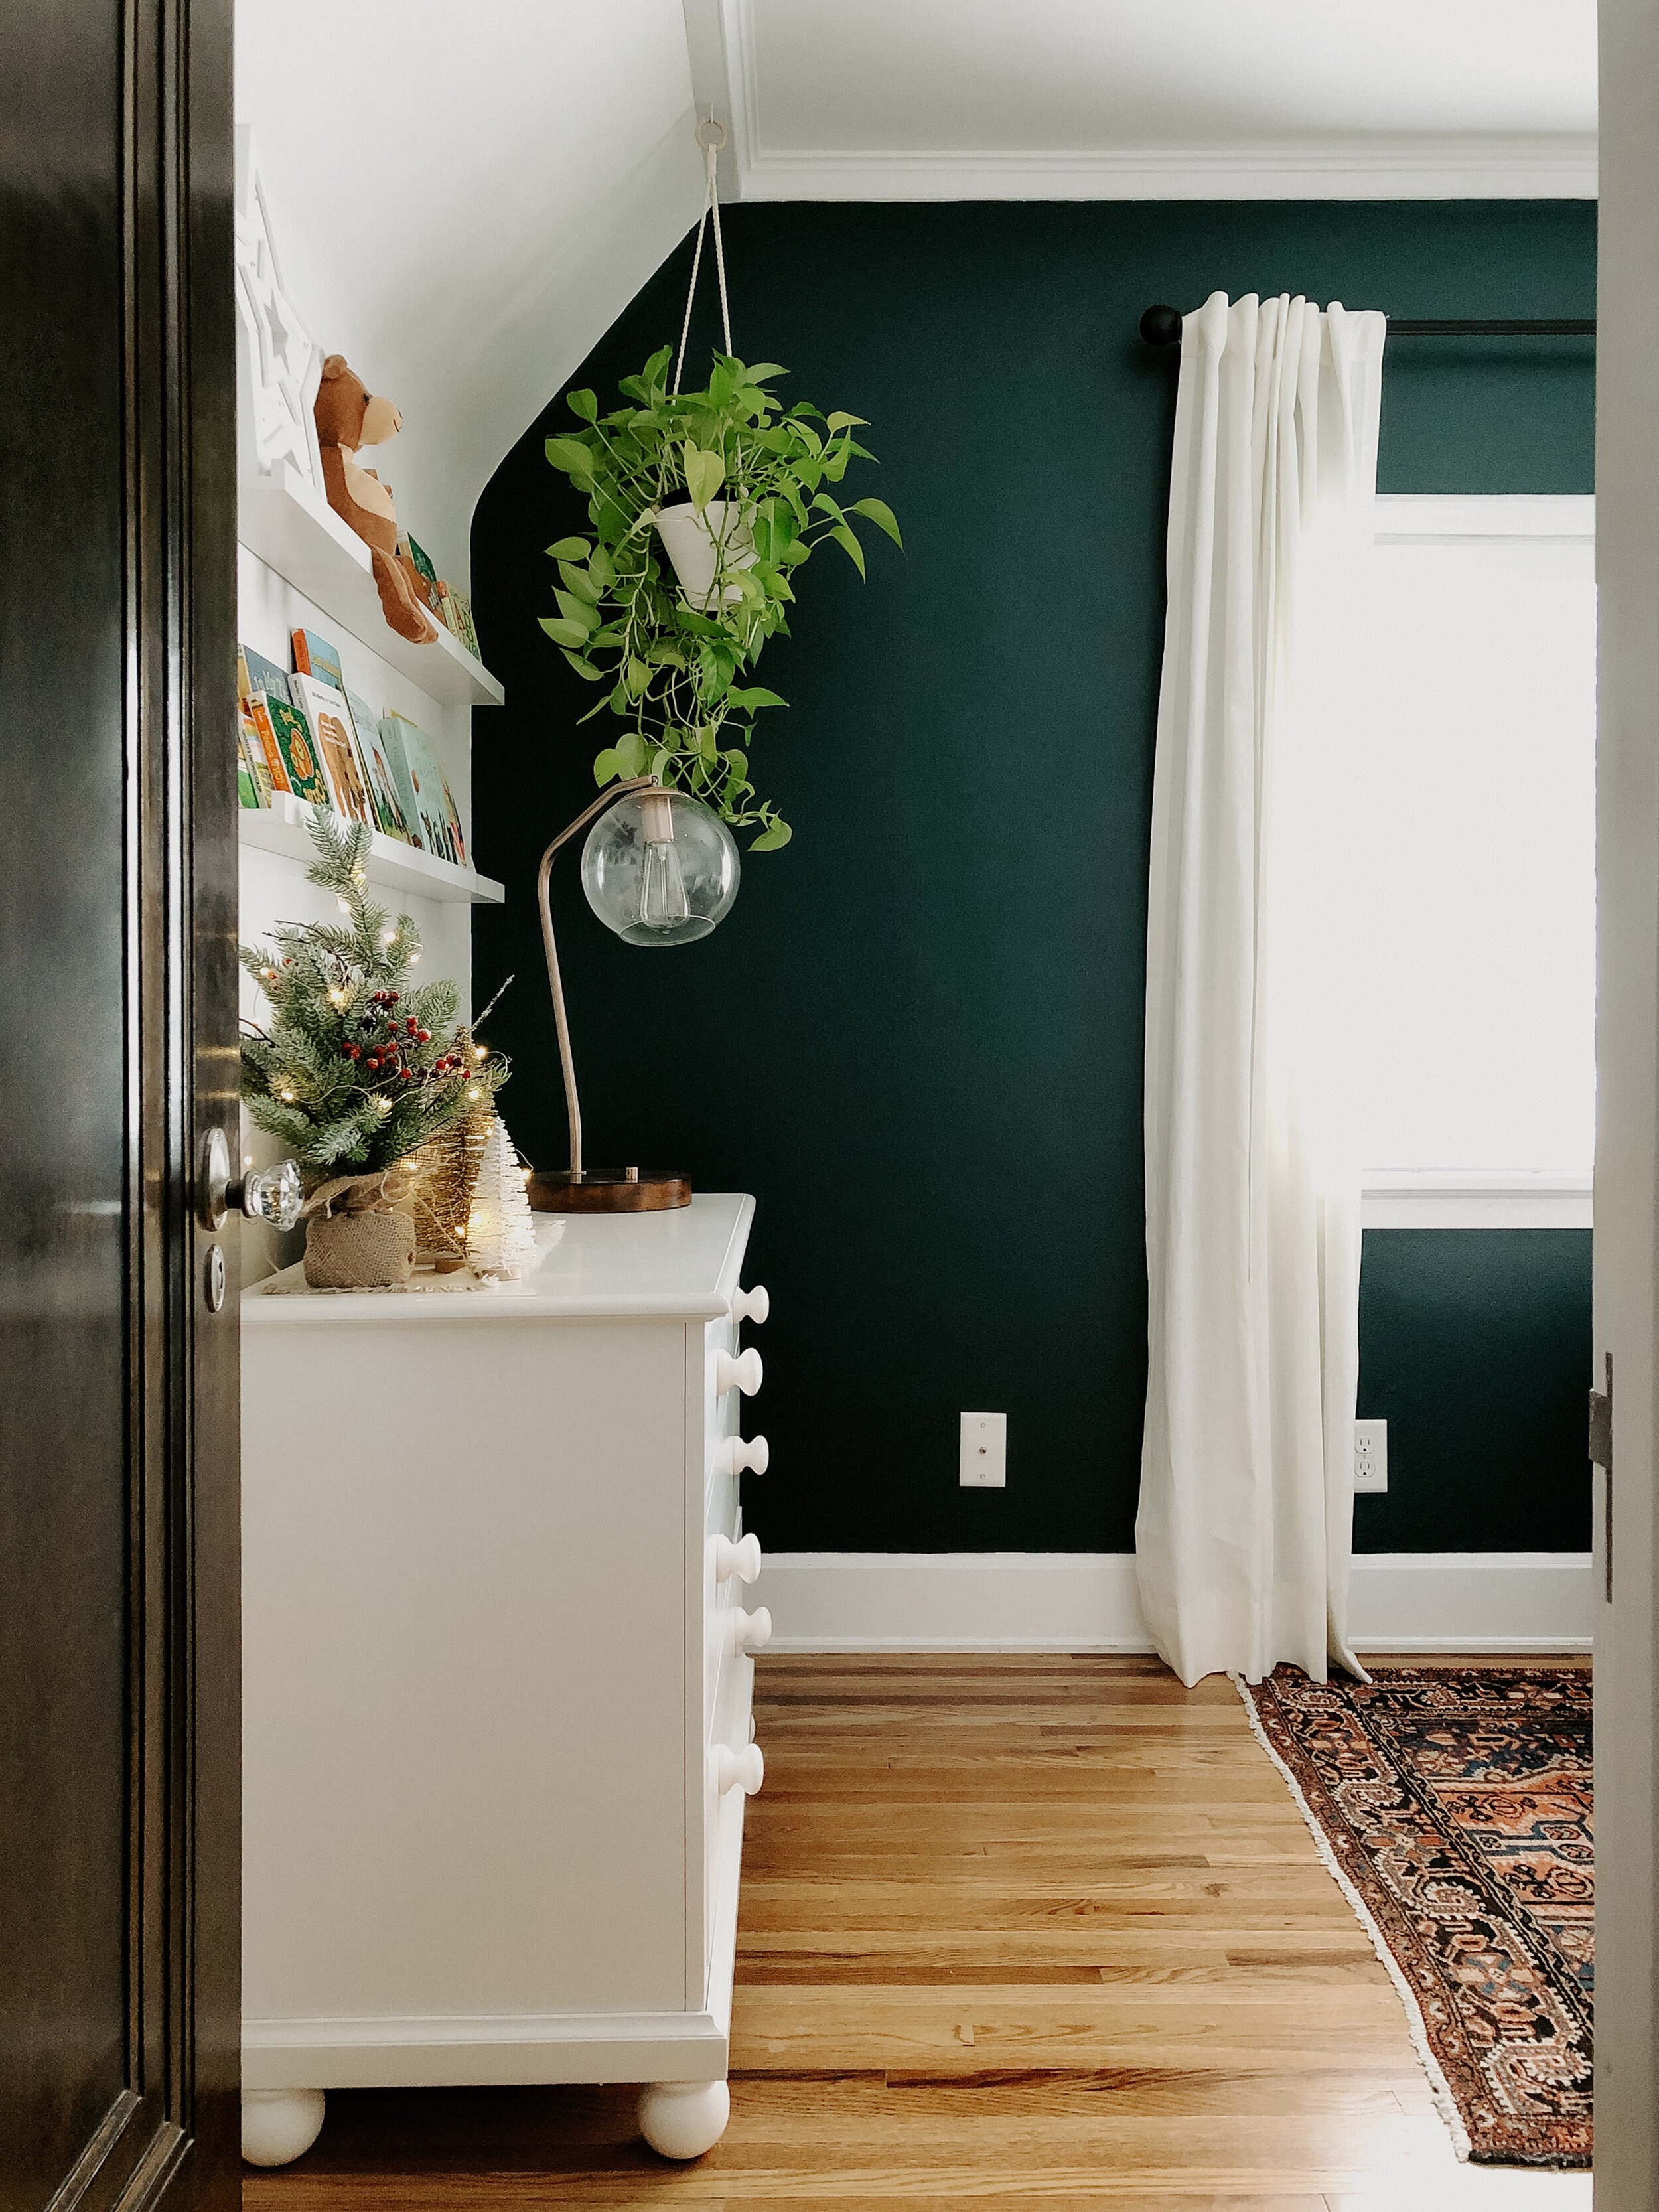 Dresser | Vintage Rug | Hanging Planter | Curtains | Curtain Rod | “Night Watch” Paint color from Home Depot | Picture Ledge